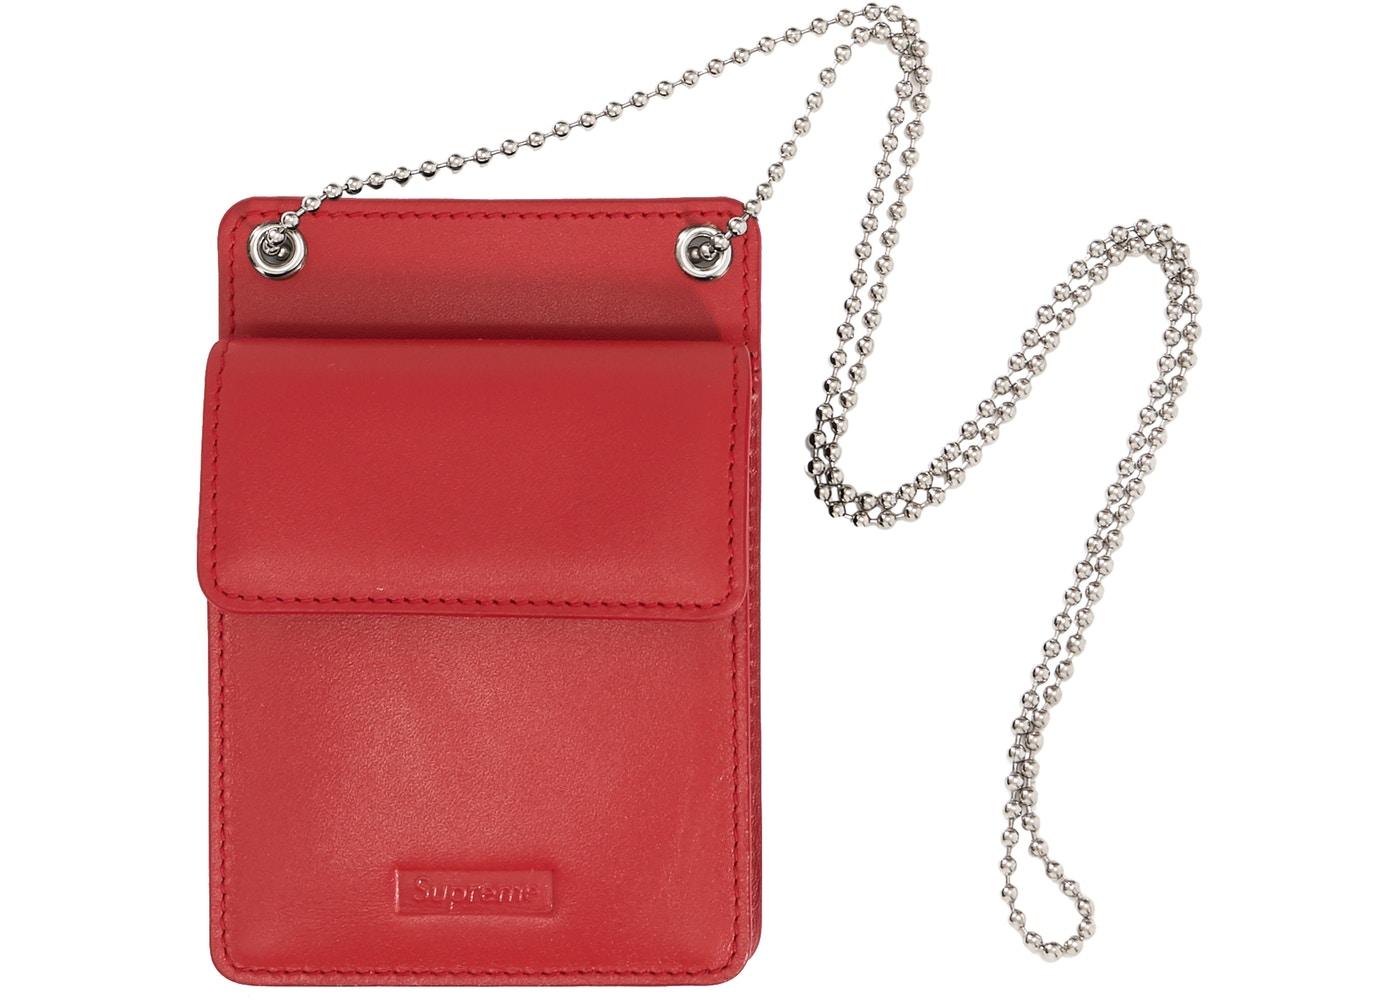 Supreme Leather ID Holder +Wallet Red - StockX News